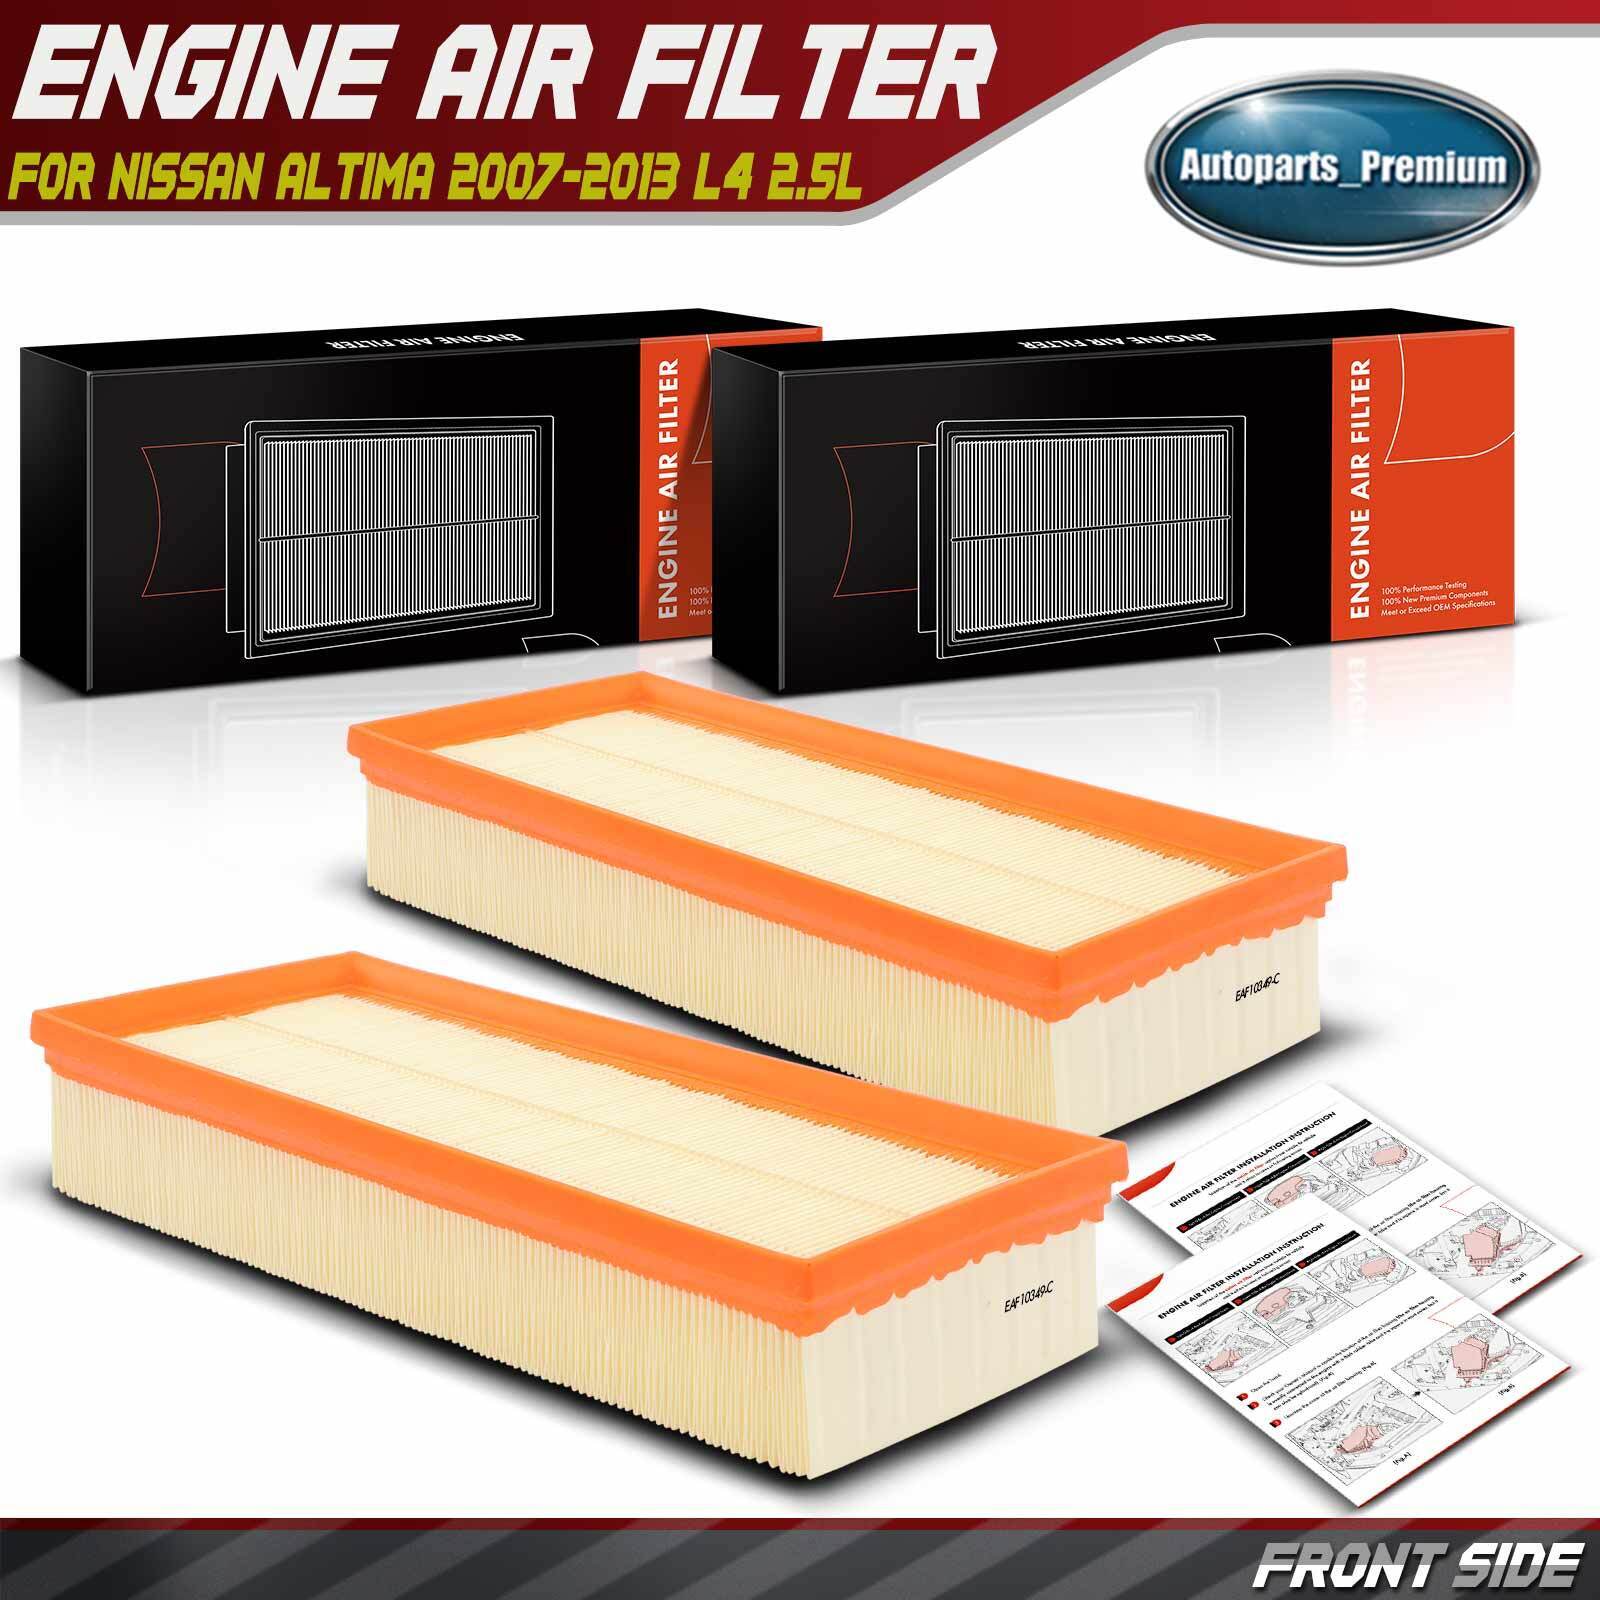 2x Engine Air Filter for Nissan Altima 2007 2008 2009 2010 2011 2012 2013 2.5L